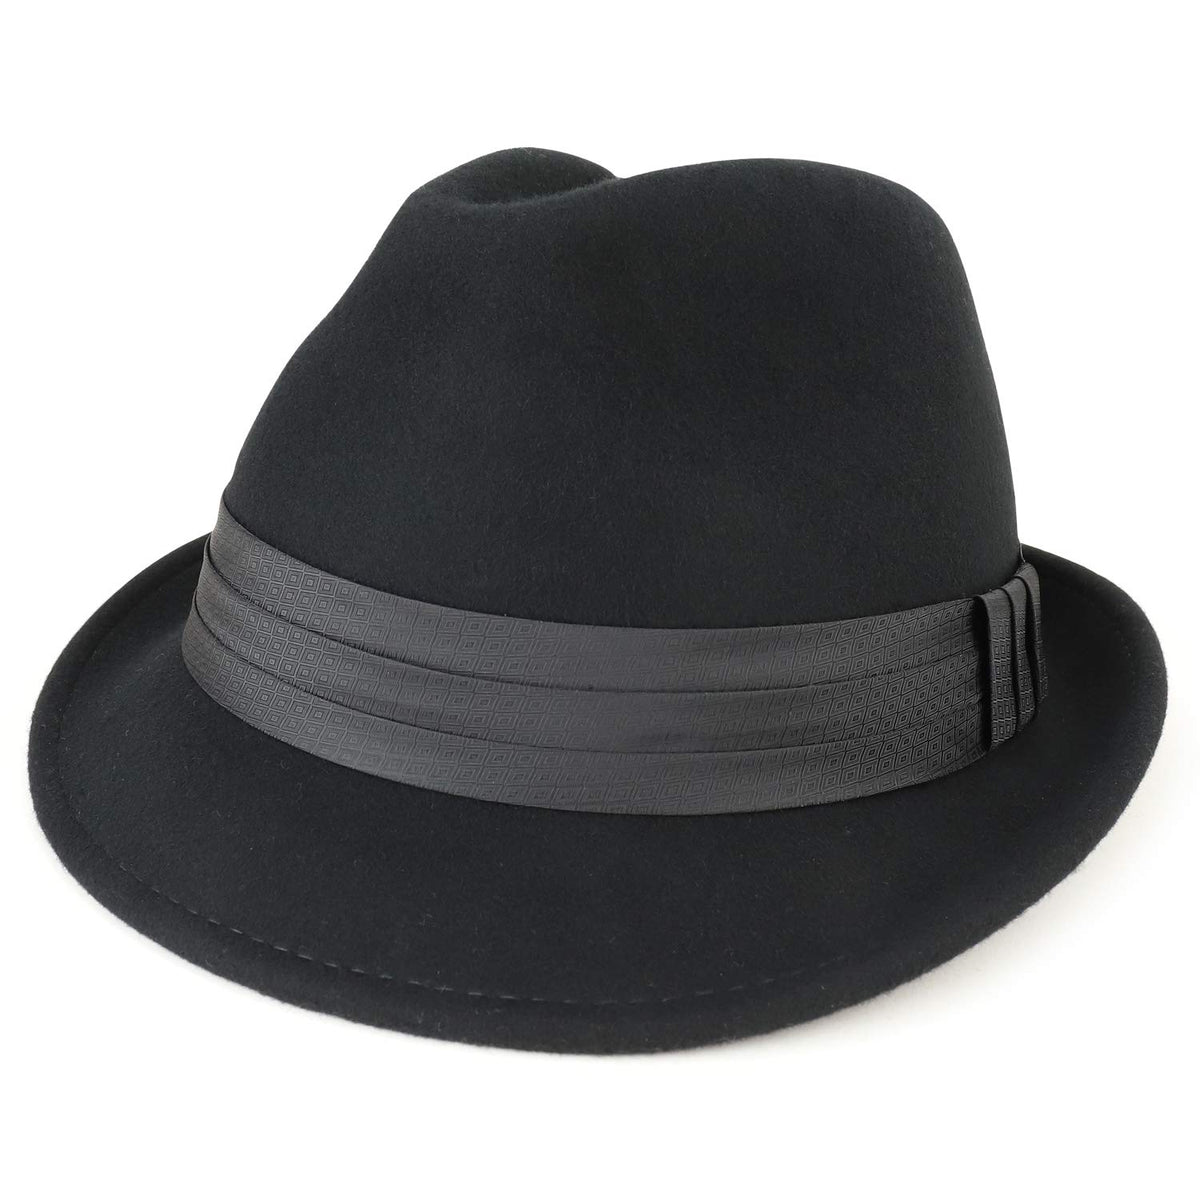 Armycrew Oversize Wool Felt Trilby Fedora Hat with Satin Band